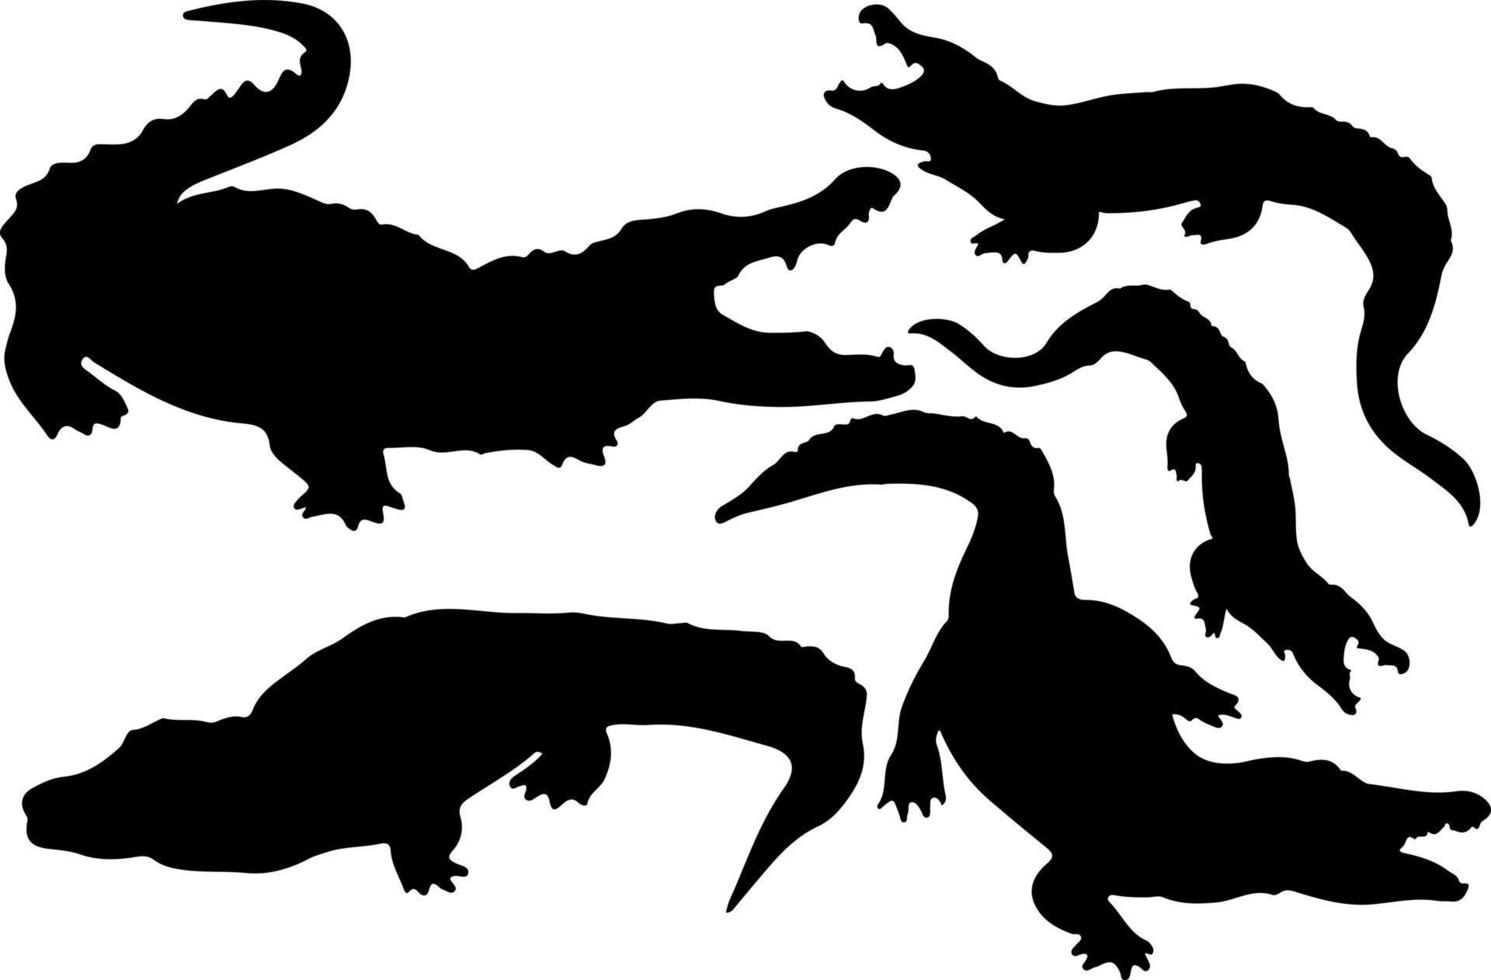 Crocodile silhouette vector for websites, graphics related artwork